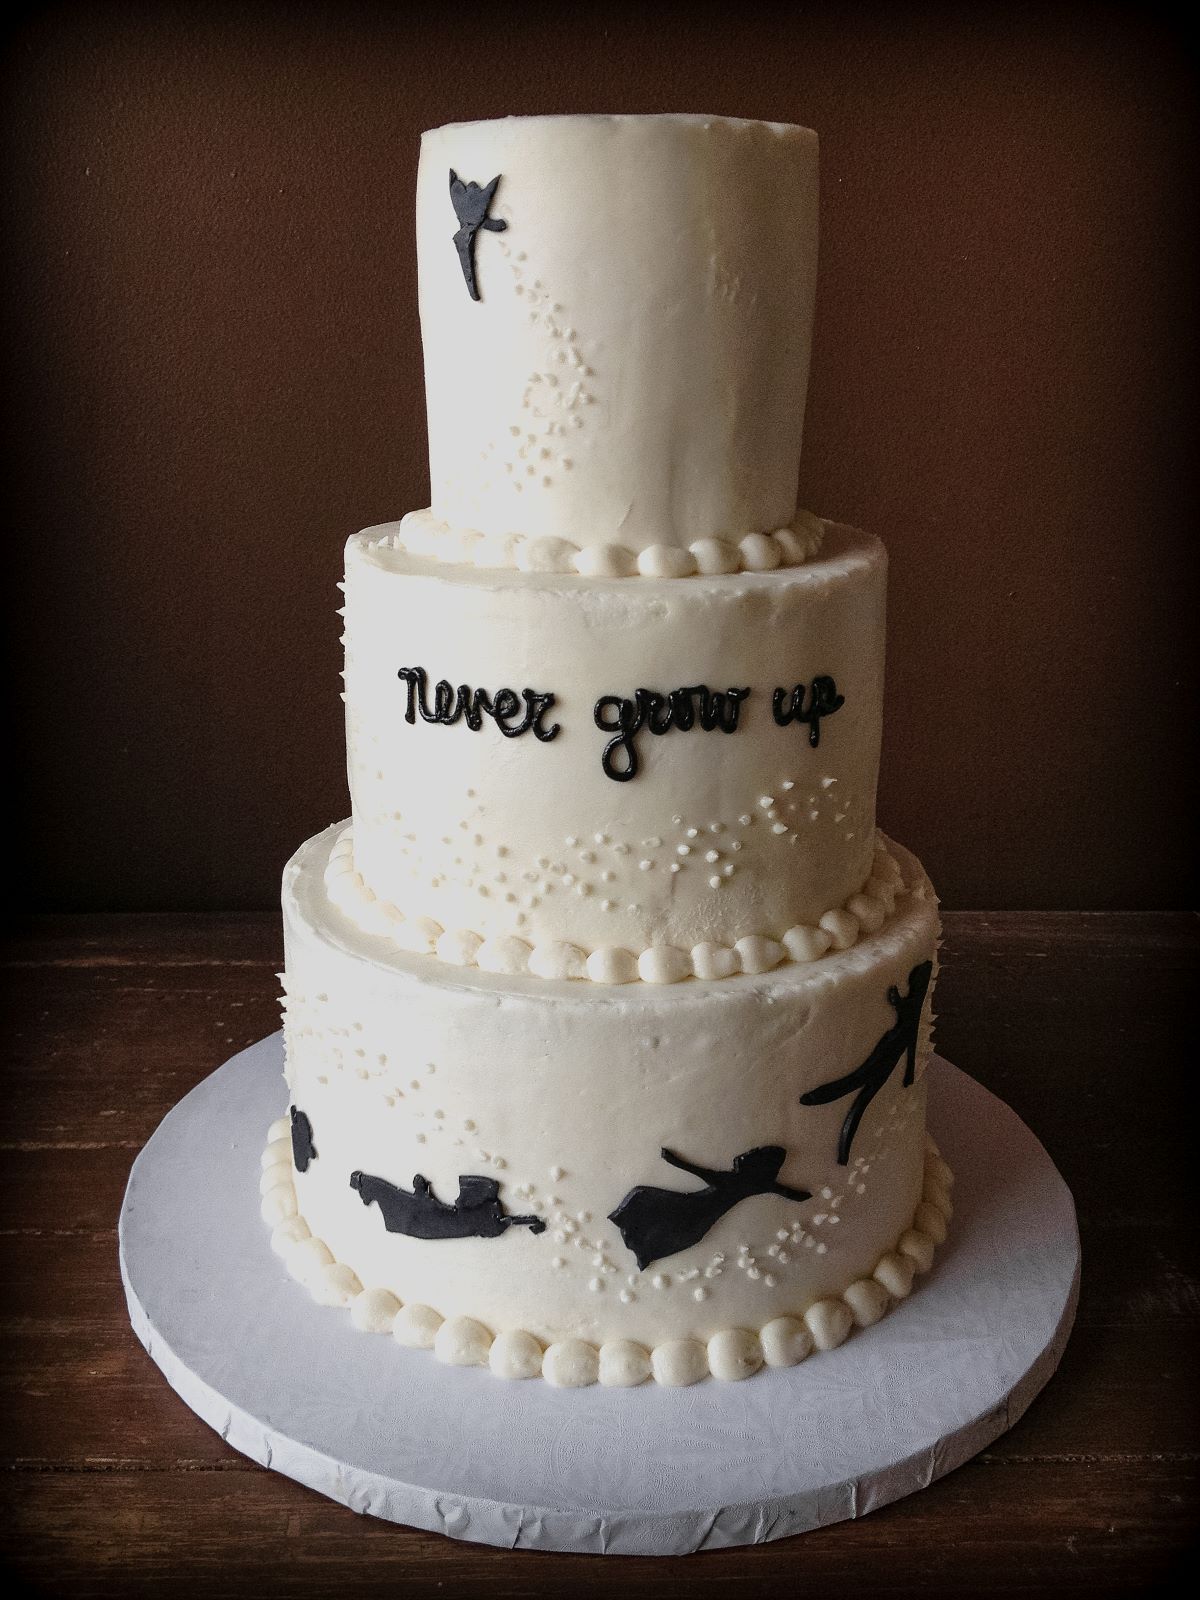 A baby shower cake with a minimalist cake design for a Peter Pan theme.